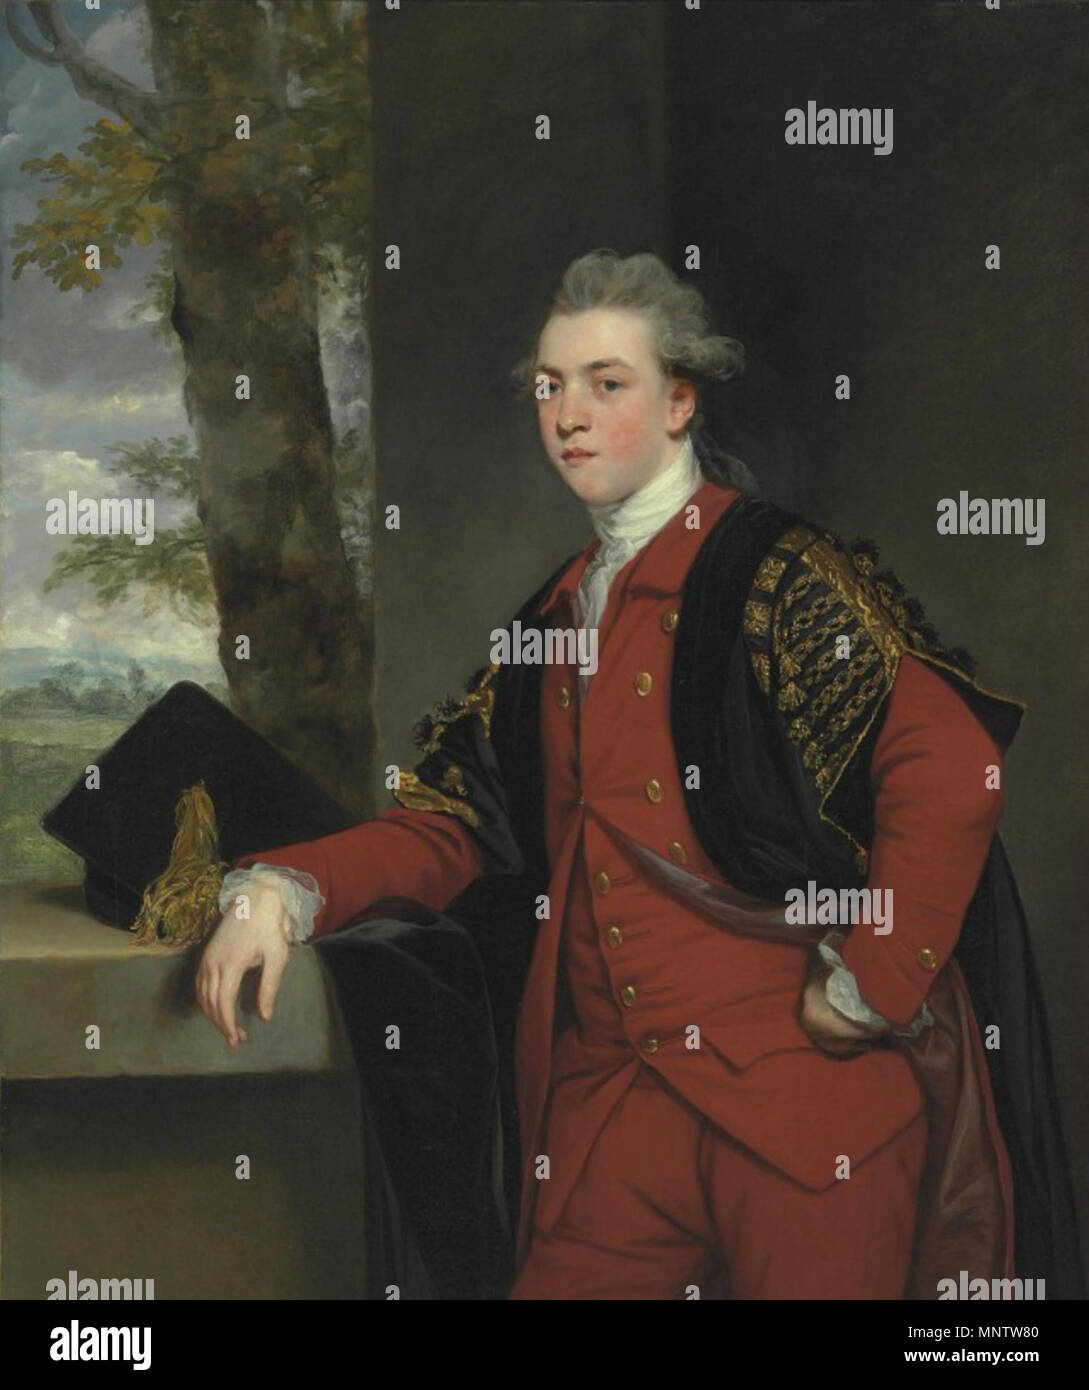 .  English: Francis Basset (1757-1835), later 1st Baron de Dunstanville. Sold by Christie's Auctioneers, Sale 2449, Old Master Paintings, 8 June 2011, New York, Rockefeller Center, Lot 80, Price realised USD 182,500. Catalogued as: 'Sir Joshua Reynolds, P.R.A. (Plympton 1723-1792 London) Portrait of Francis Basset, later 1st Baron de Dunstanville and Basset (1757-1835), standing three-quarter-length, in a red suit and undergraduate robes, a mortar-board on the wall beside him' . 18th century.   1059 Reynolds - Francis Basset Stock Photo